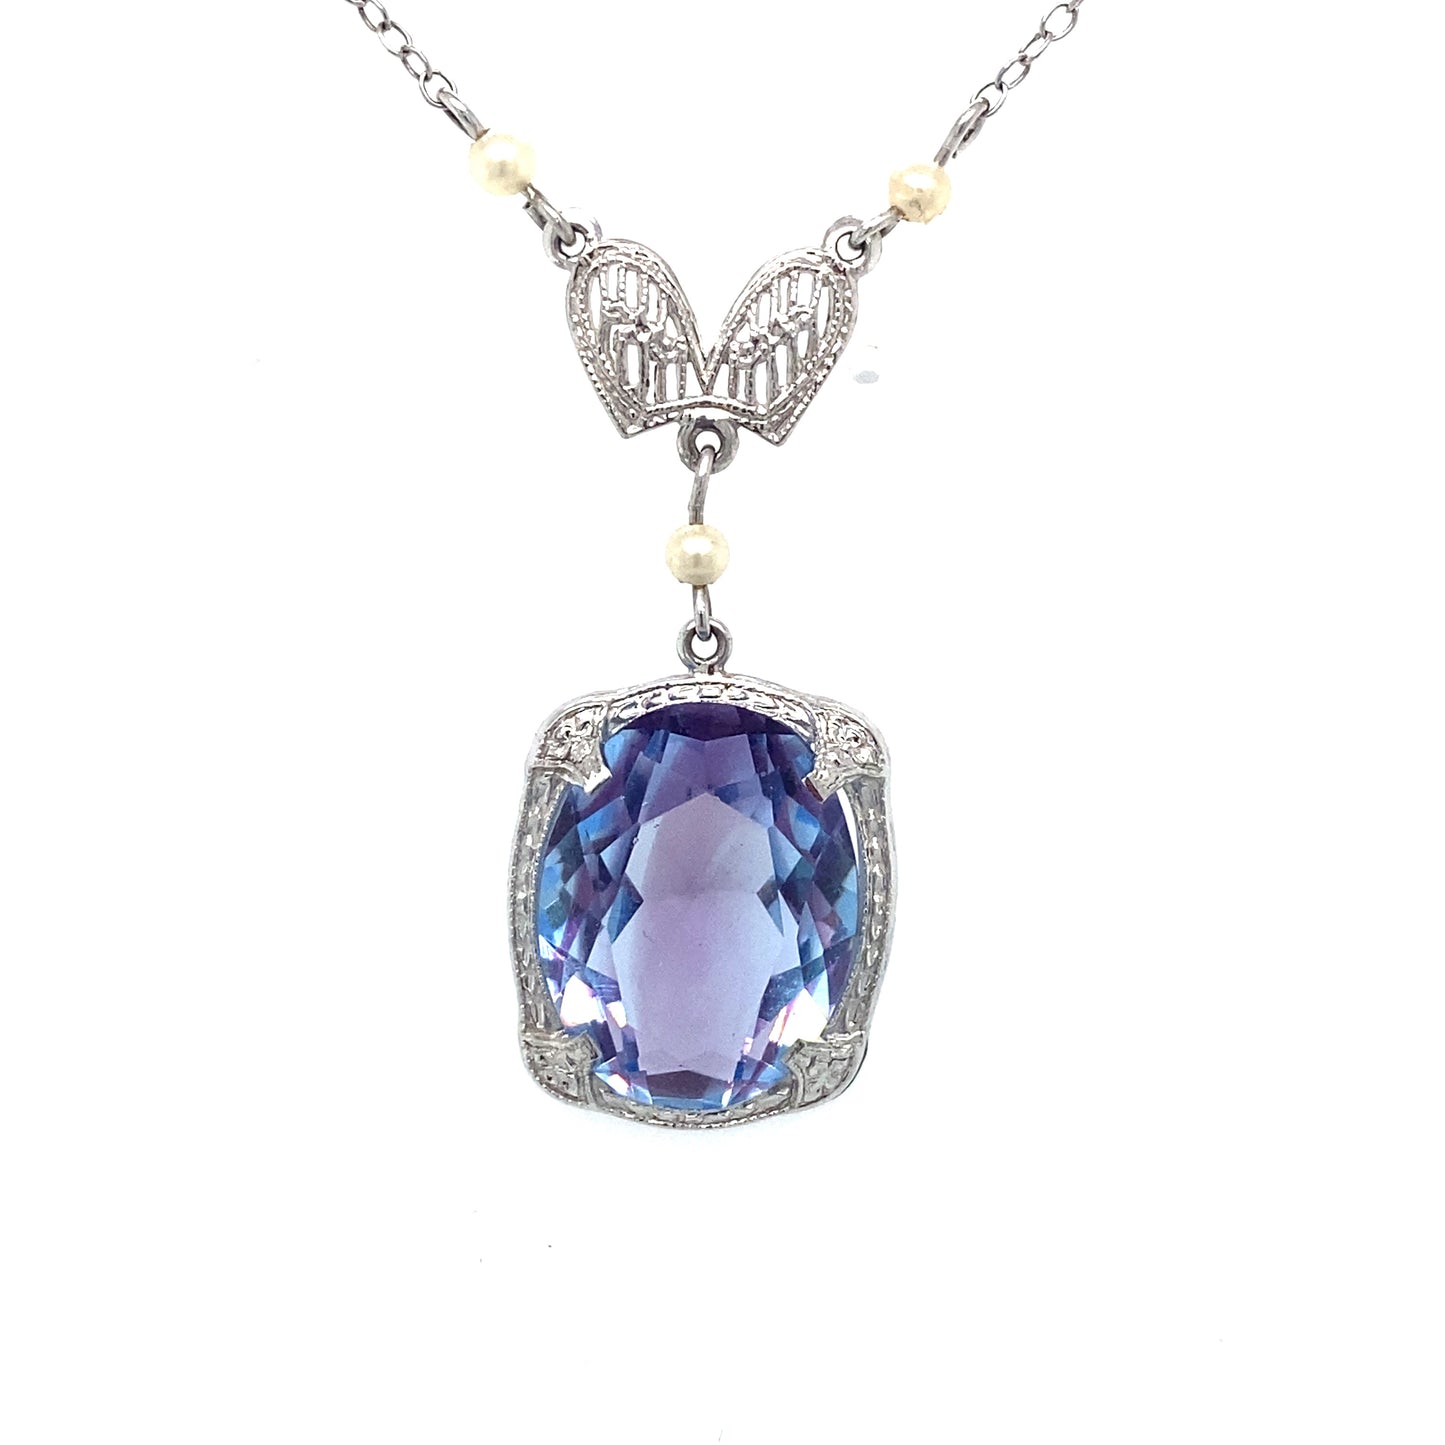 Circa 1910s Amethyst and Pearl Filigree Lavaliere Necklace in White Gold